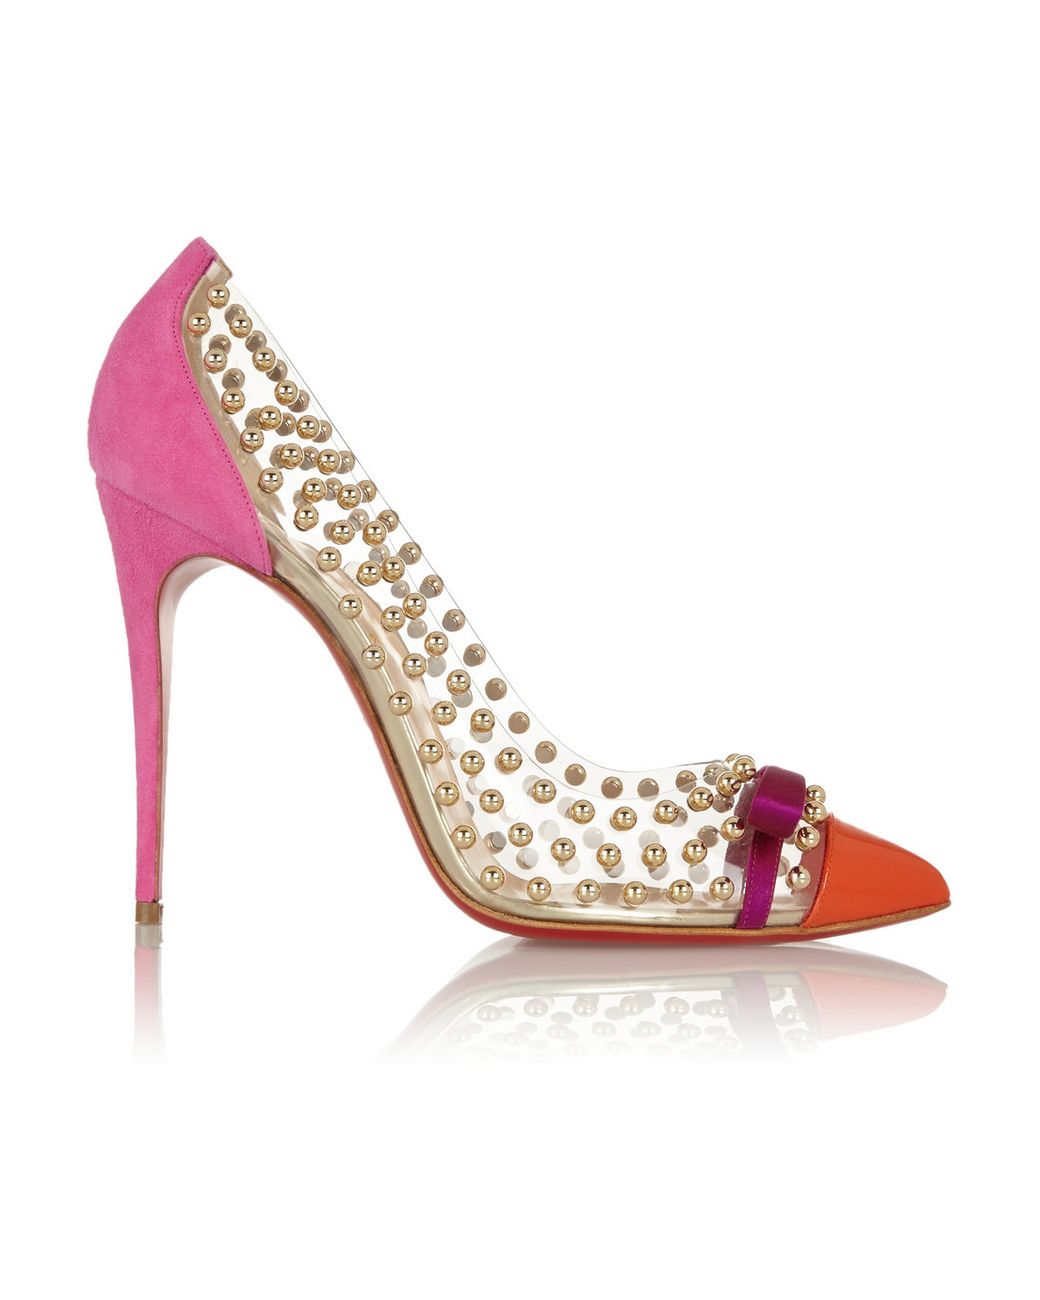 Christian Louboutin Bille Et Boule 100 Studded Pvc And Suede Pumps in ...